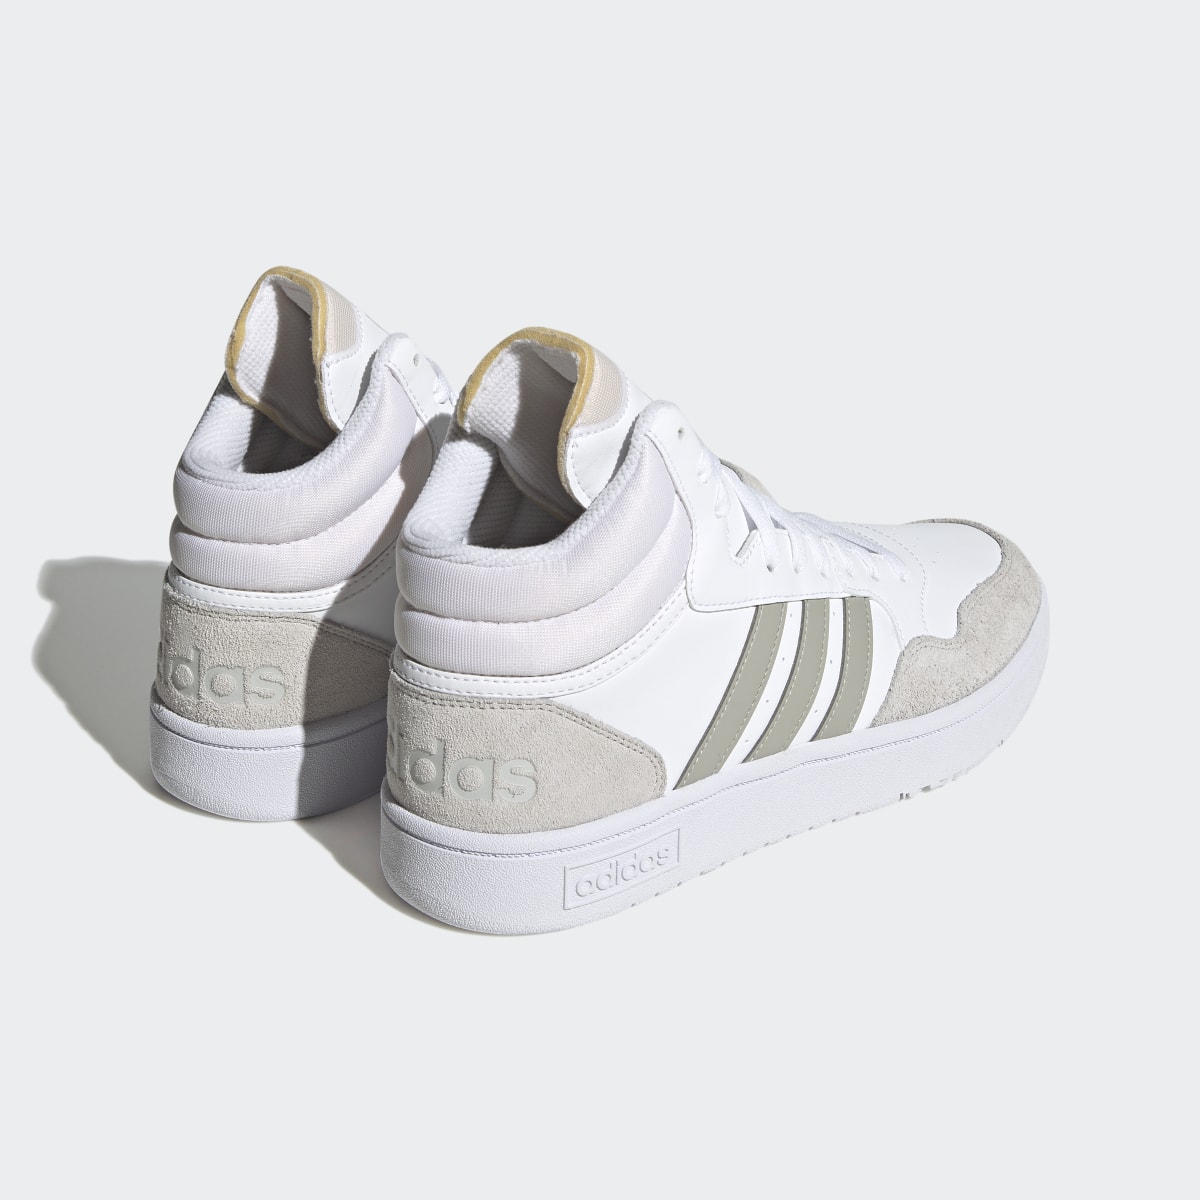 Adidas Hoops 3.0 Mid Classic Vintage Shoes. 6